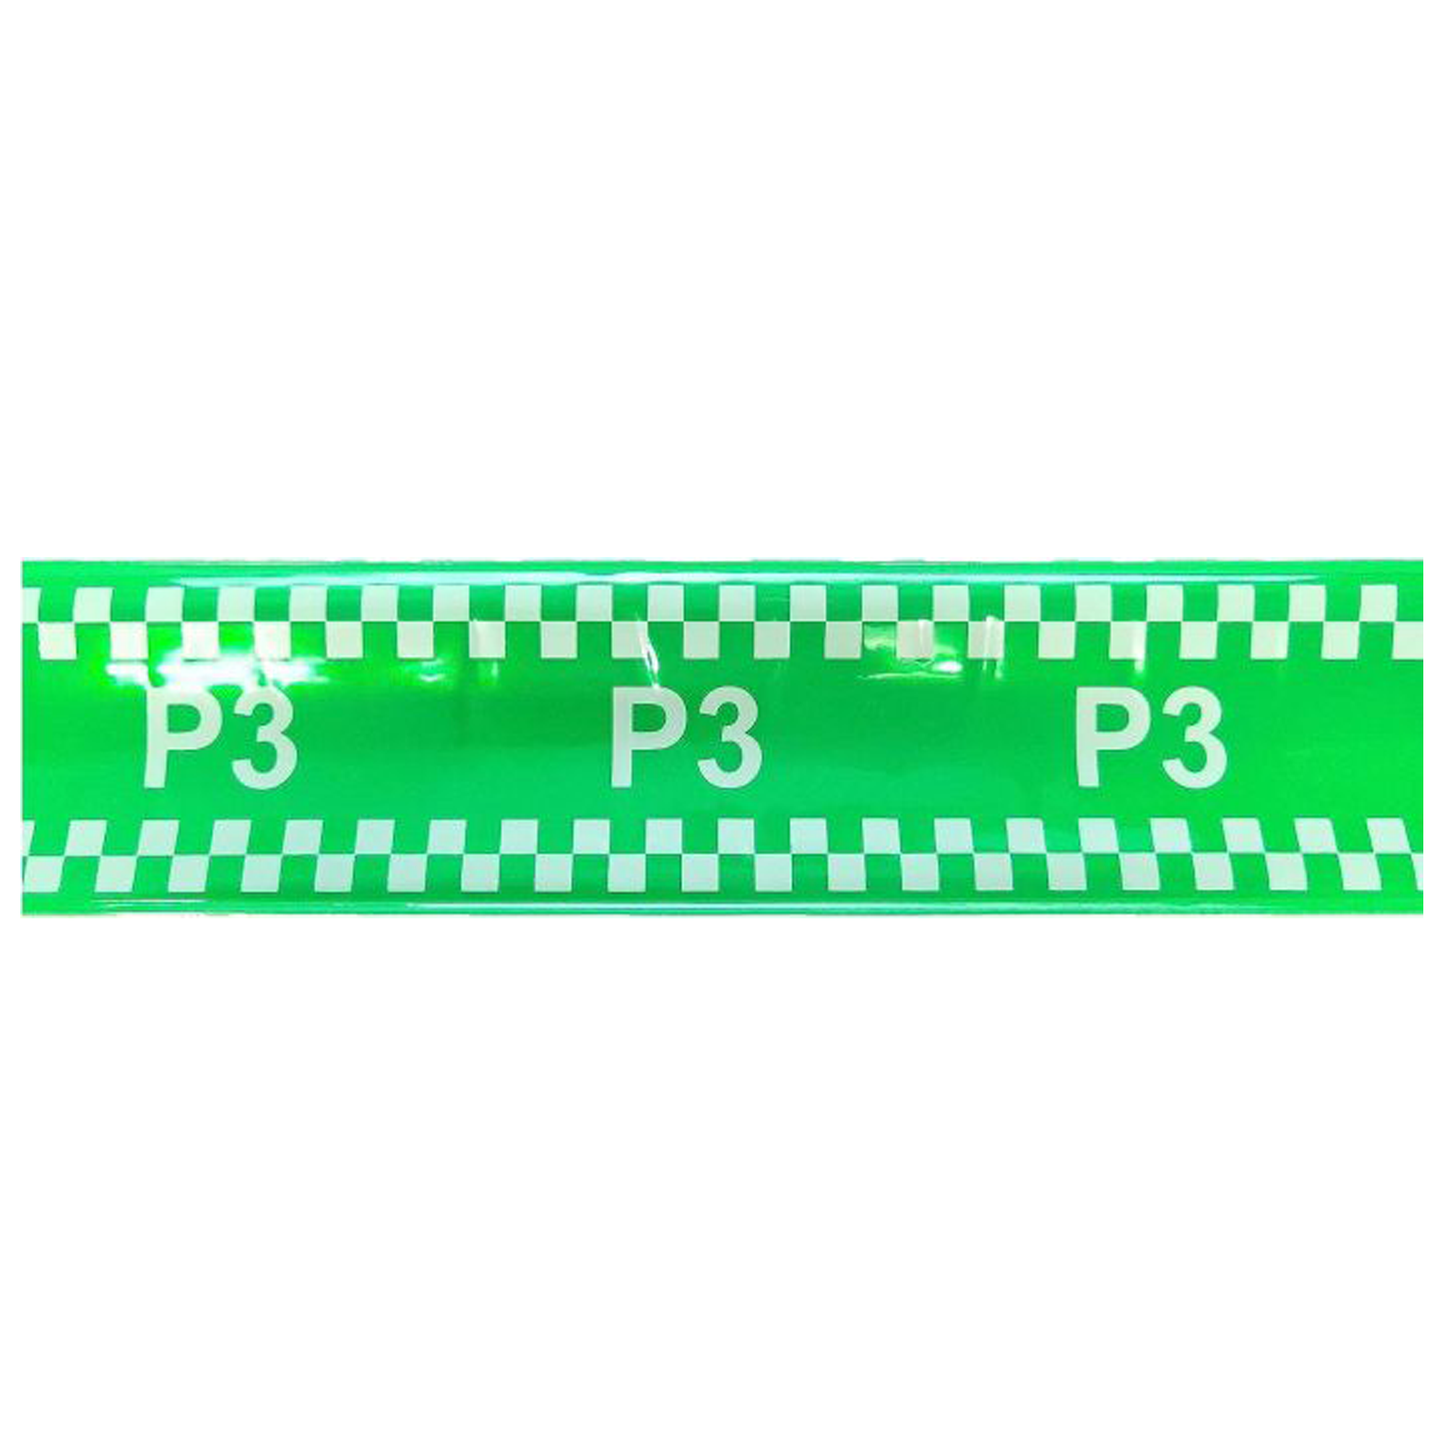 NHS Ten Second Triage (TST) Slap Band Pack of 20 - Green Case